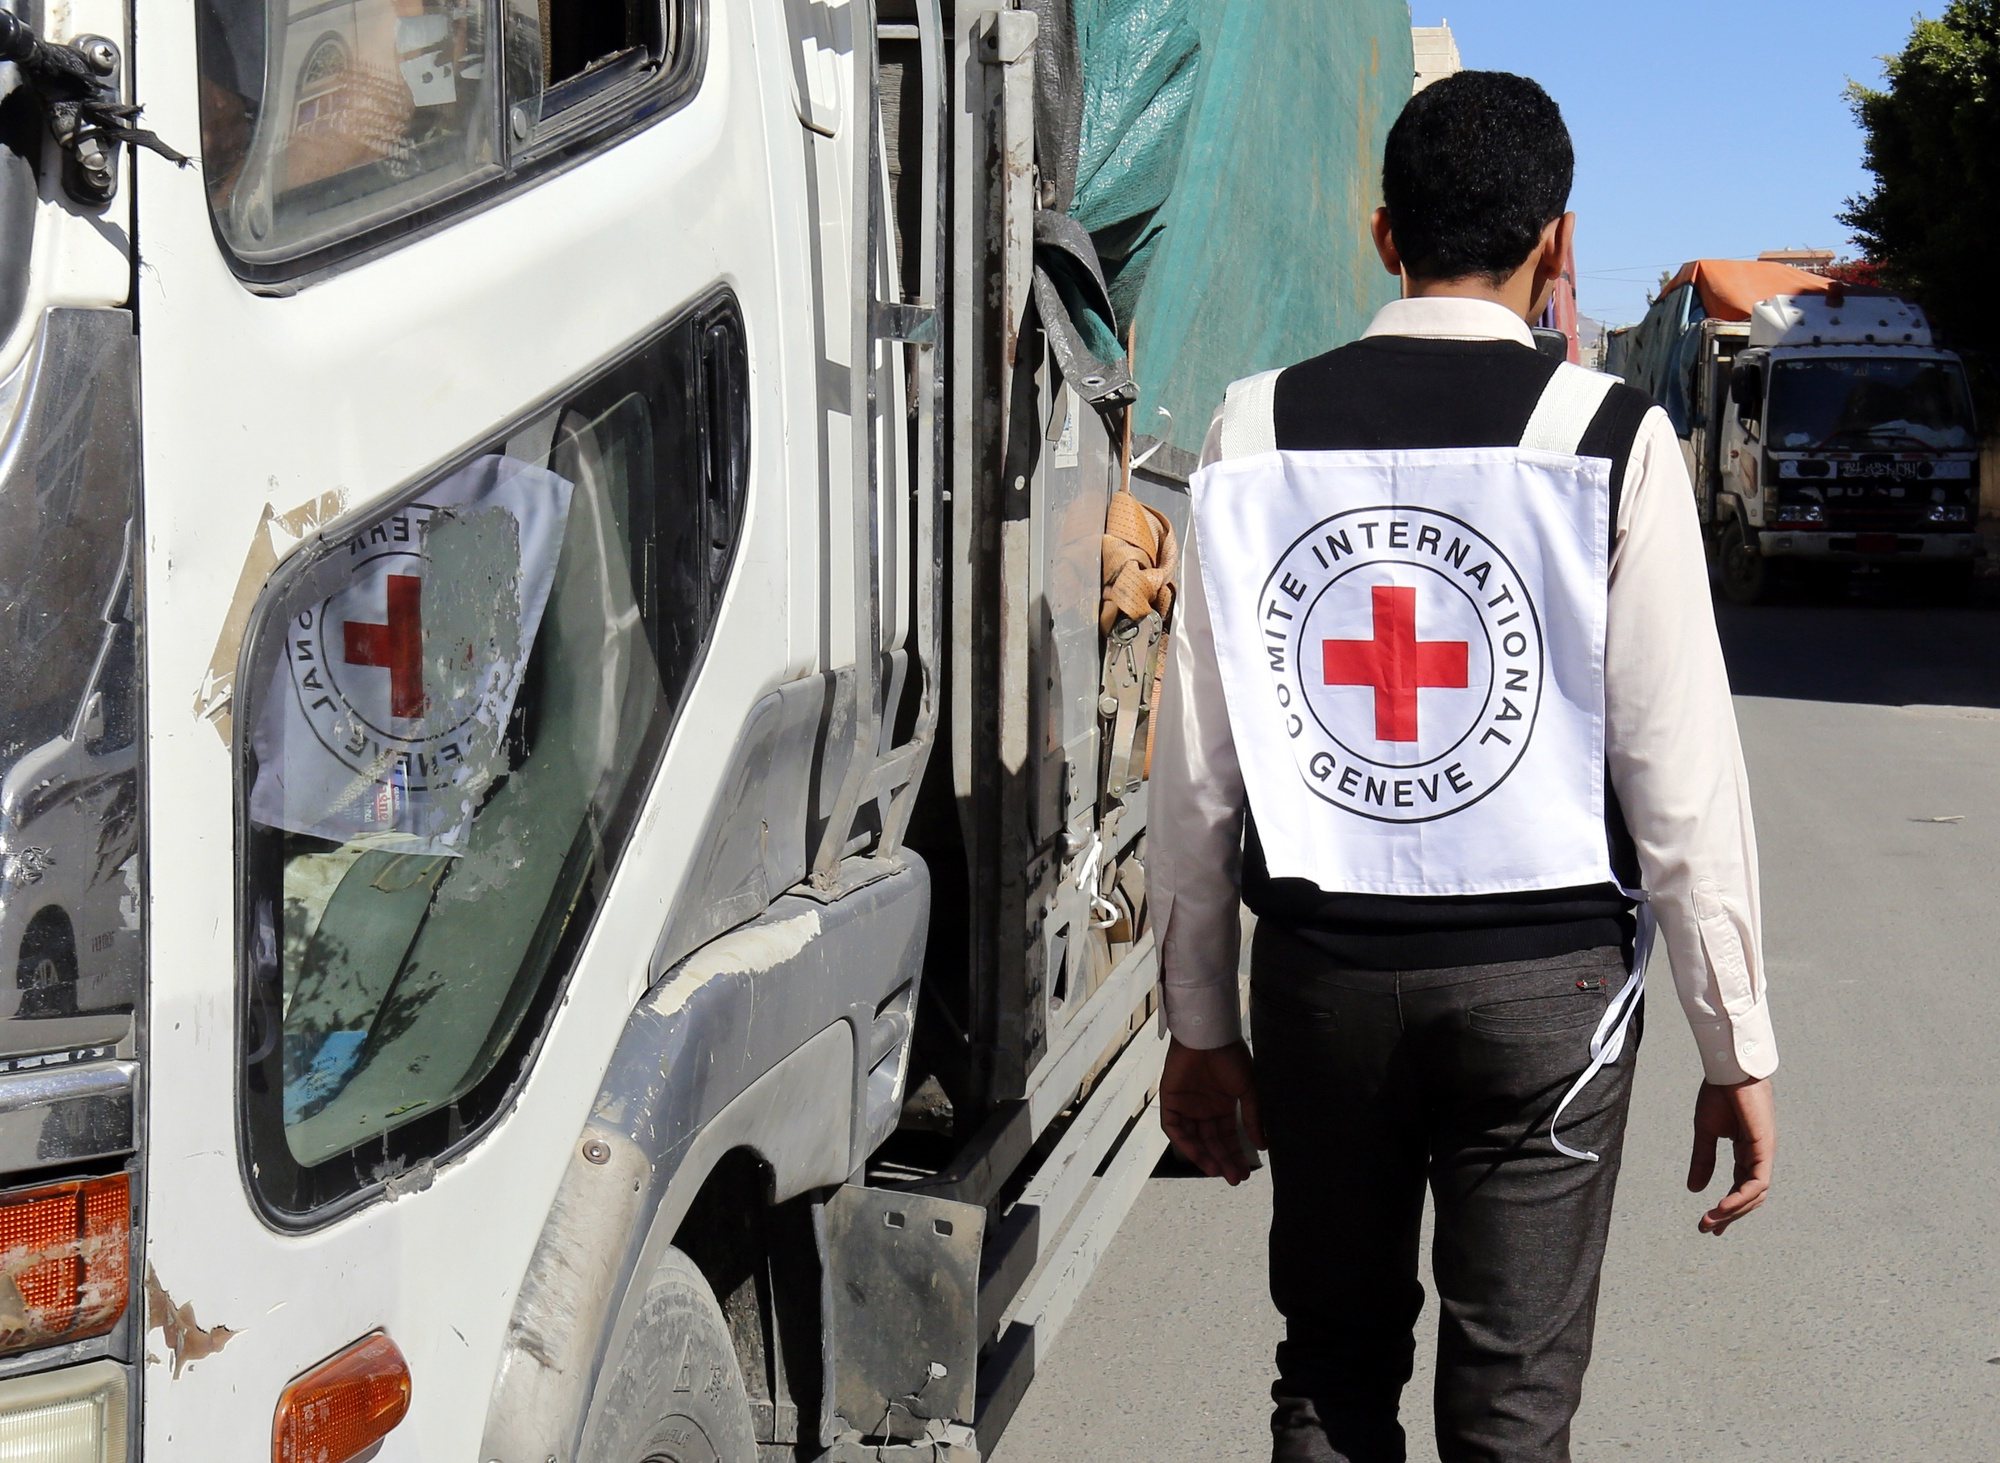 epa06791768 (FILE) - A member of staff from the International Committee of the Red Cross passes a truck carrying ICRC-provided emergency medical aid, in Sanaâ€™a, Yemen, 13 December 2017 (issued 07 June 2018). According to reports, the International Committee of the Red Cross (ICRC) has pulled 71 staff members out of Yemen amid rising insecurity in the war-torn Arab country.  EPA/YAHYA ARHAB